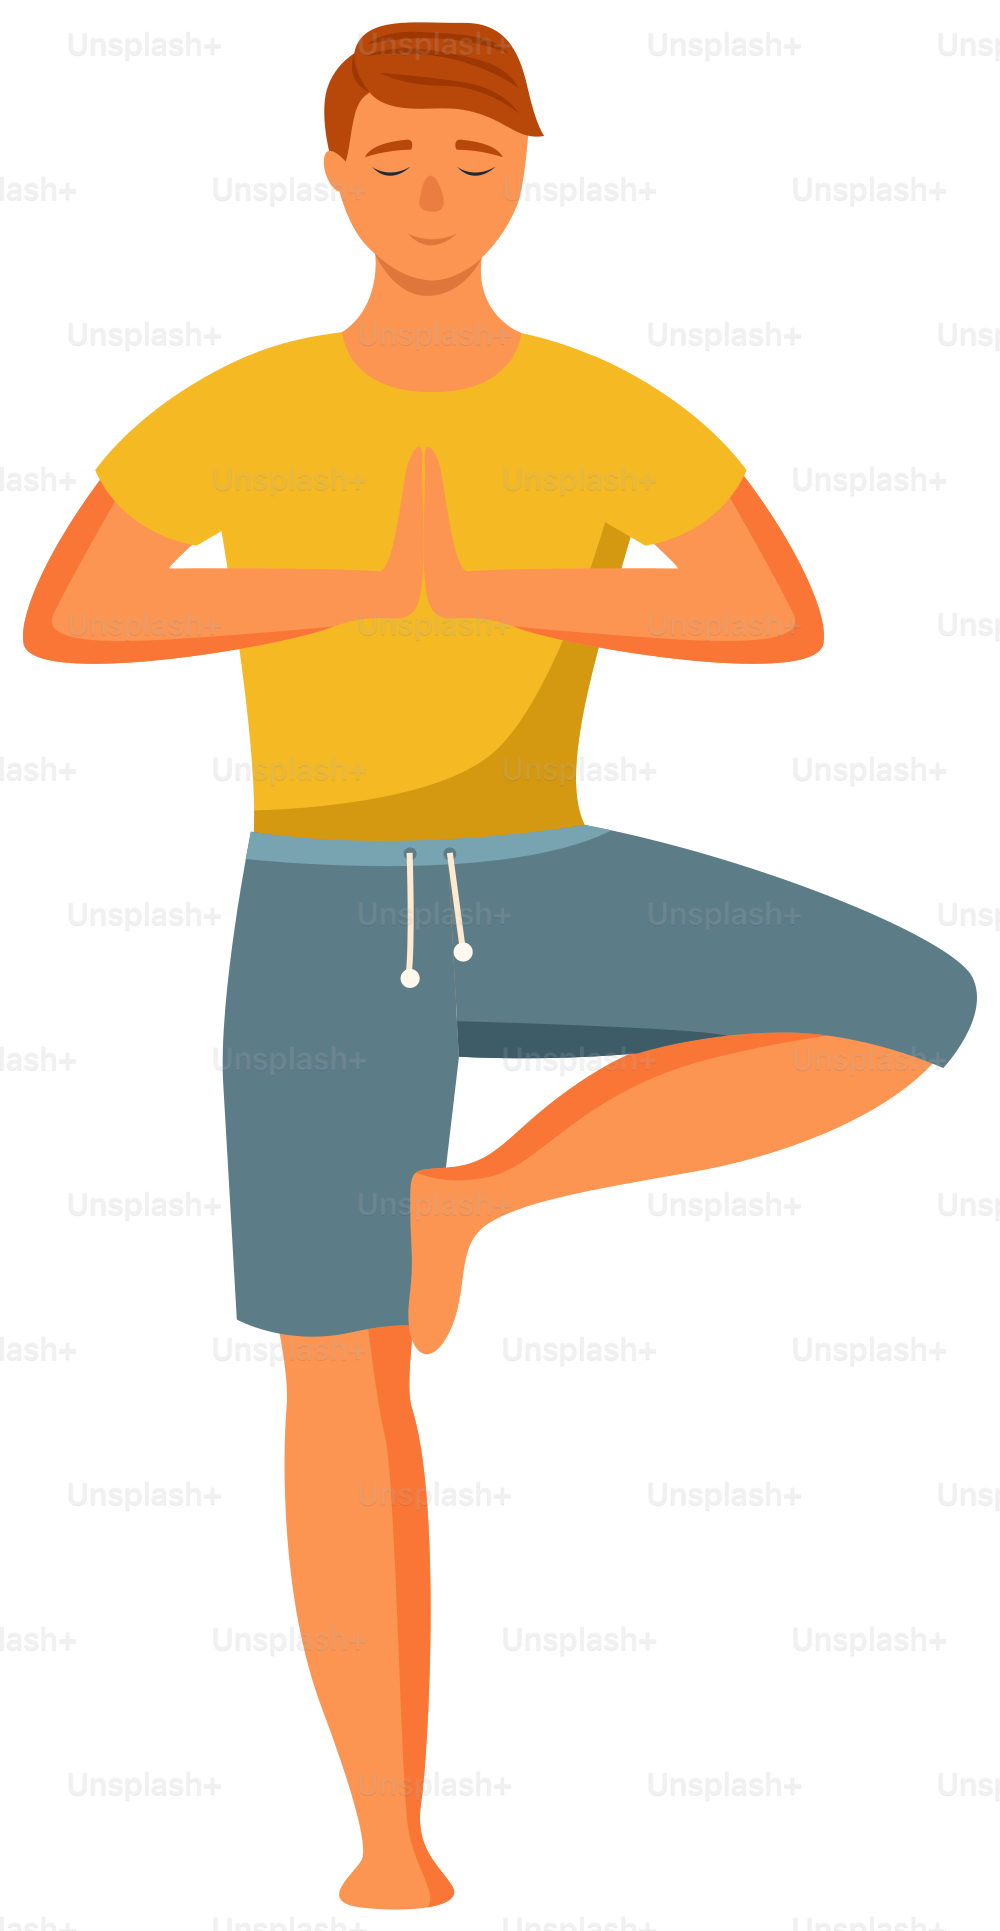 Man doing yoga isolated on white background. Young happy man standing in a tree pose. Male character taking care of his health, leads a healthy lifestyle, doing relaxation exercises, gets energy